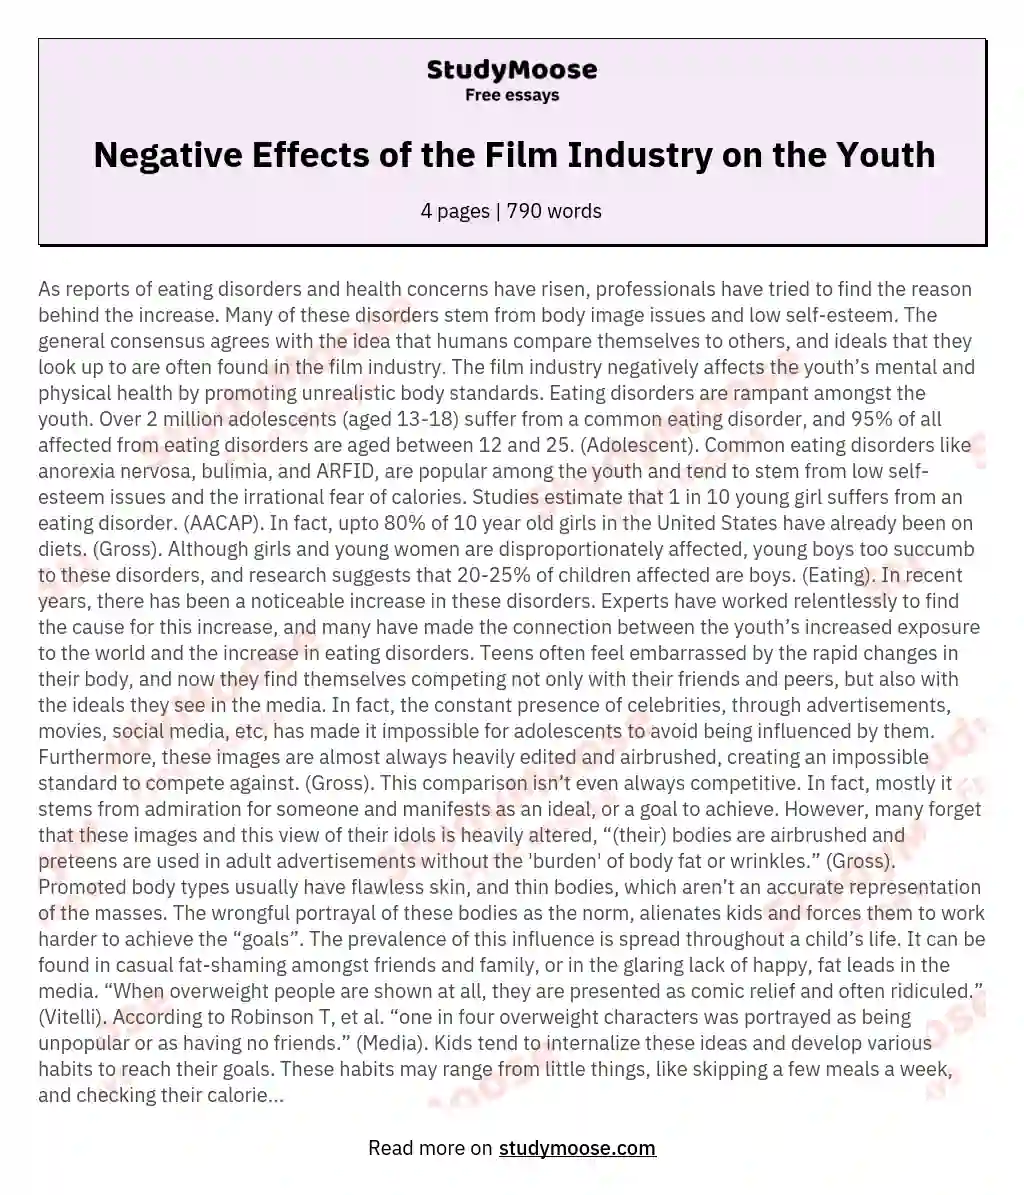 Negative Effects of the Film Industry on the Youth essay